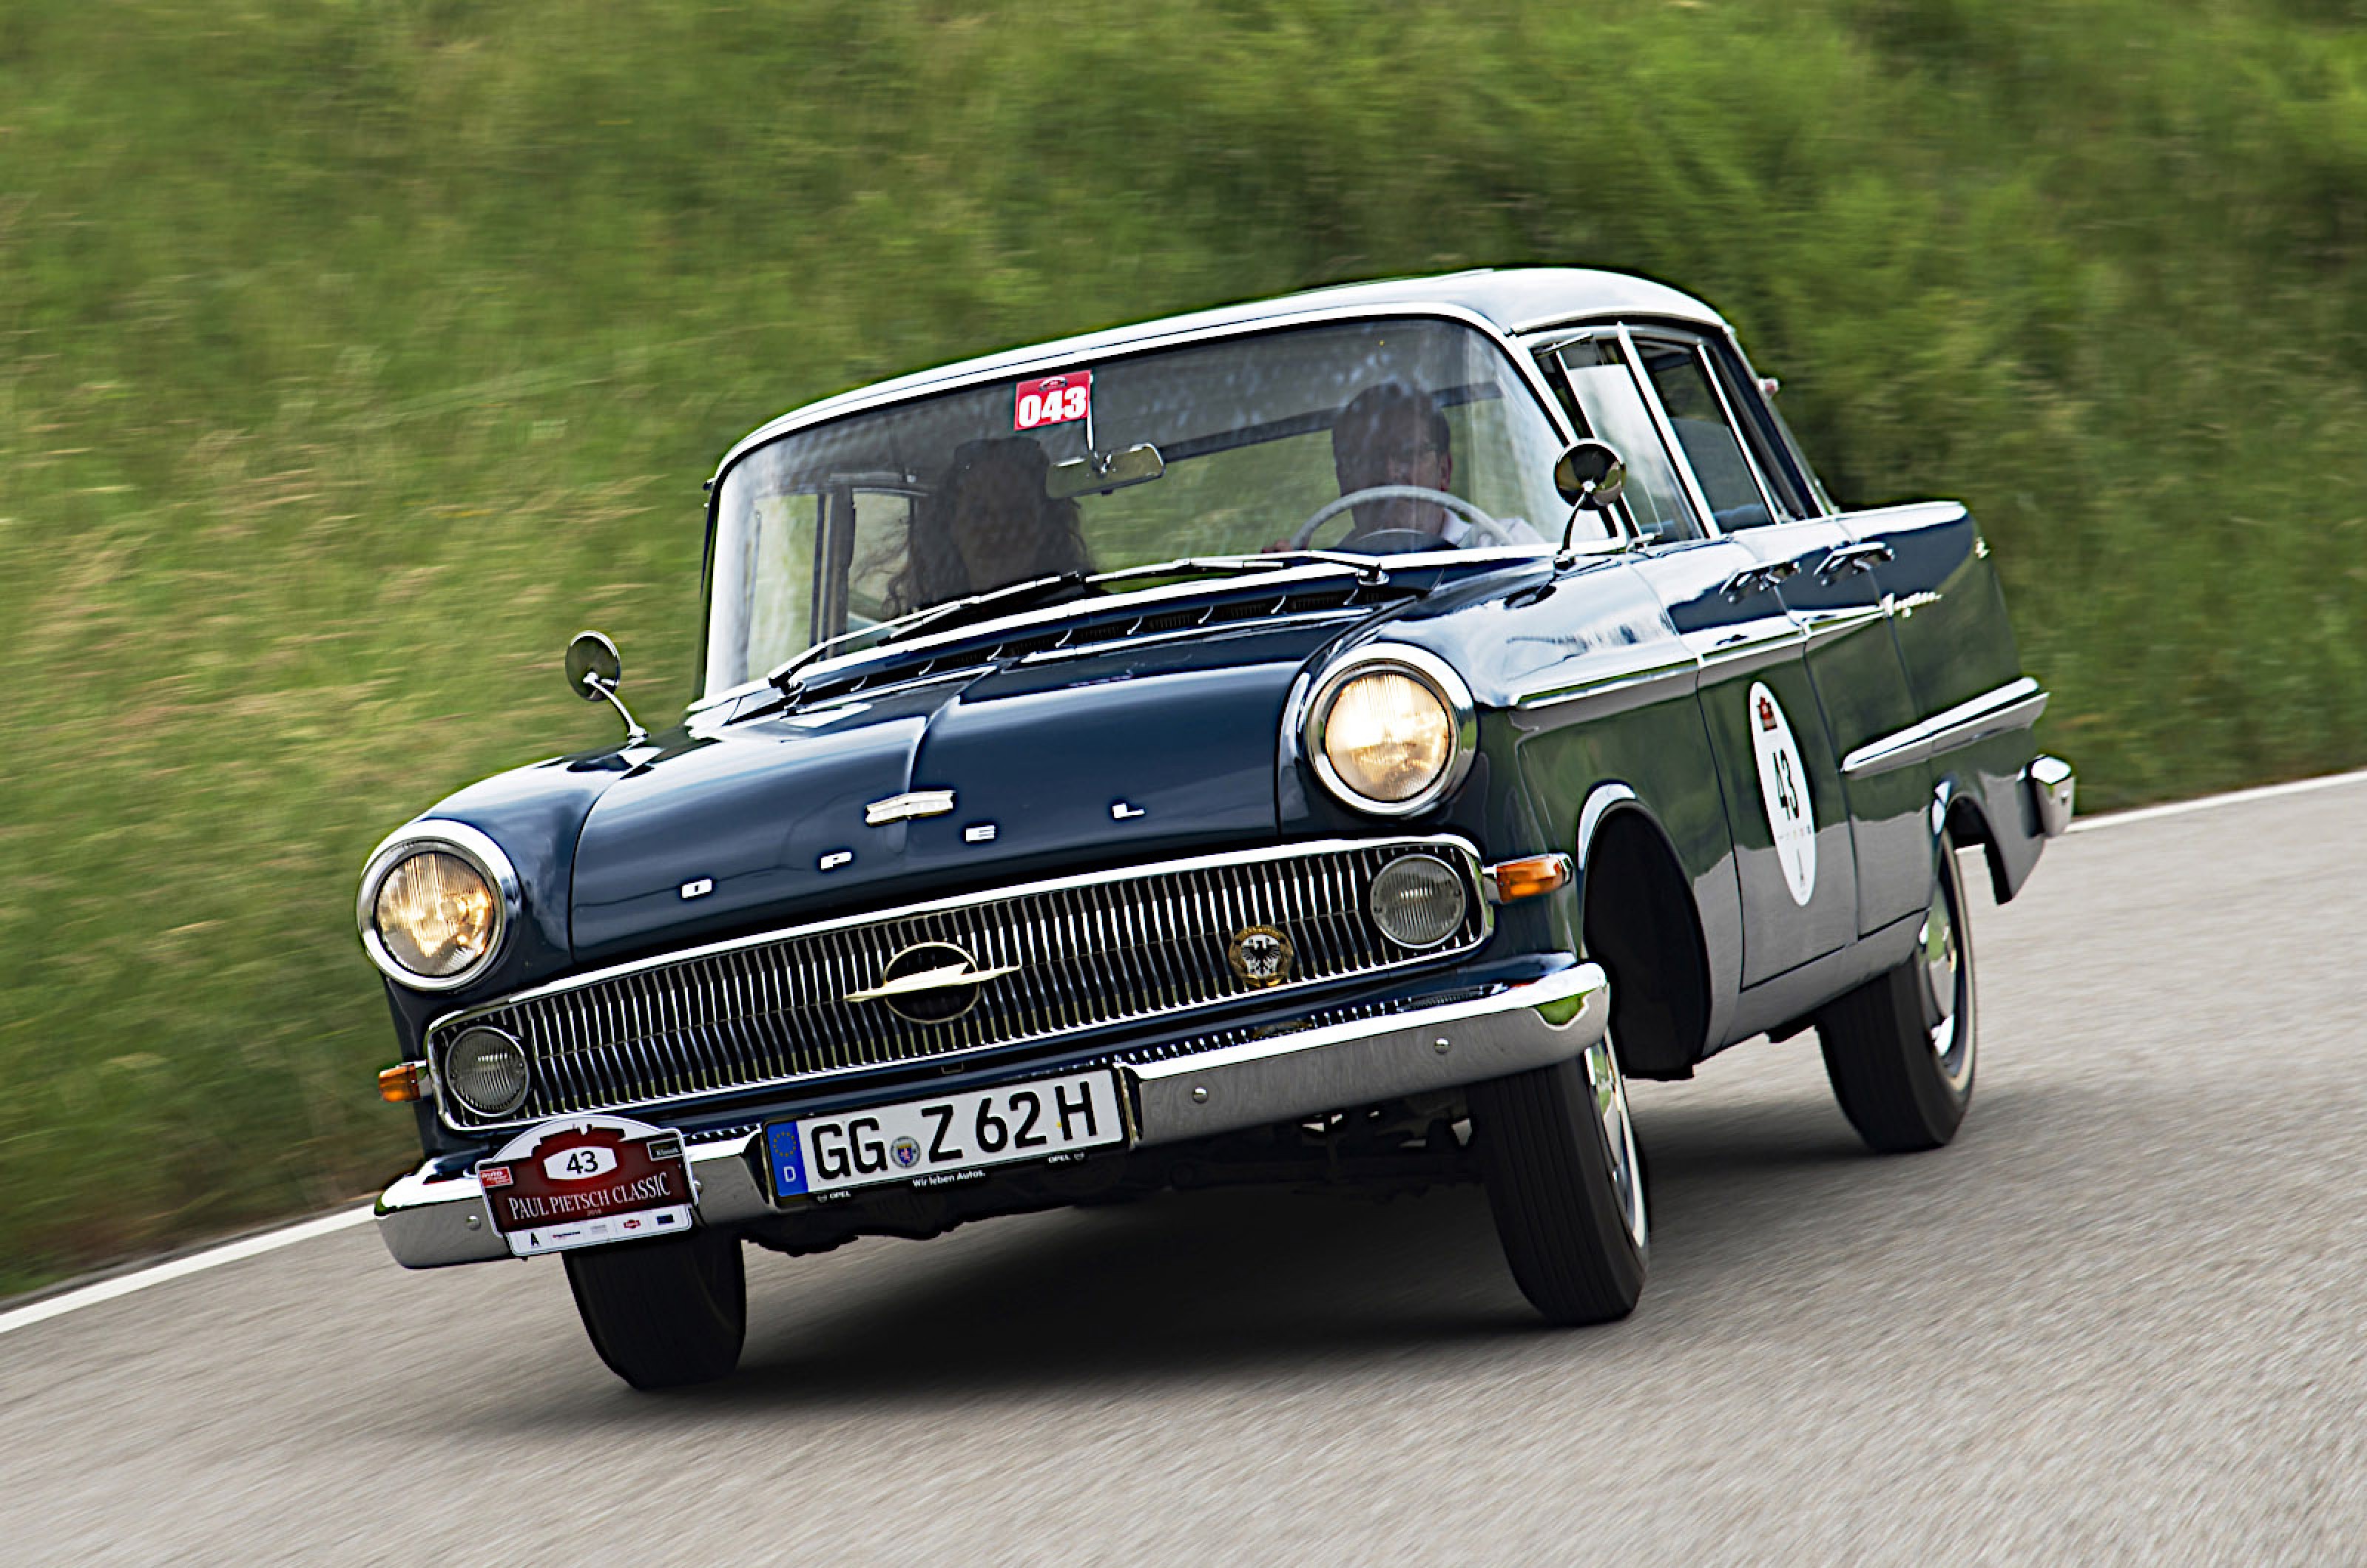 <p>There was clear American influence in the design of the ‘58 Kapitän, which replaced a previous model with the now old-fashioned ponton styling.</p>  <p>Features borrowed from the other side of the Atlantic included tailfins (fairly modest in this case) and a wraparound windshield.</p>  <p>Unfortunately, the car was not at all successful in its single year of production, and Opel was obliged to come up with something different for 1959.</p>  <p>Visually, the next Kapitän (pictured) was broadly similar to its immediate predecessor, though its grille and front bumper were now far straighter than before.</p>